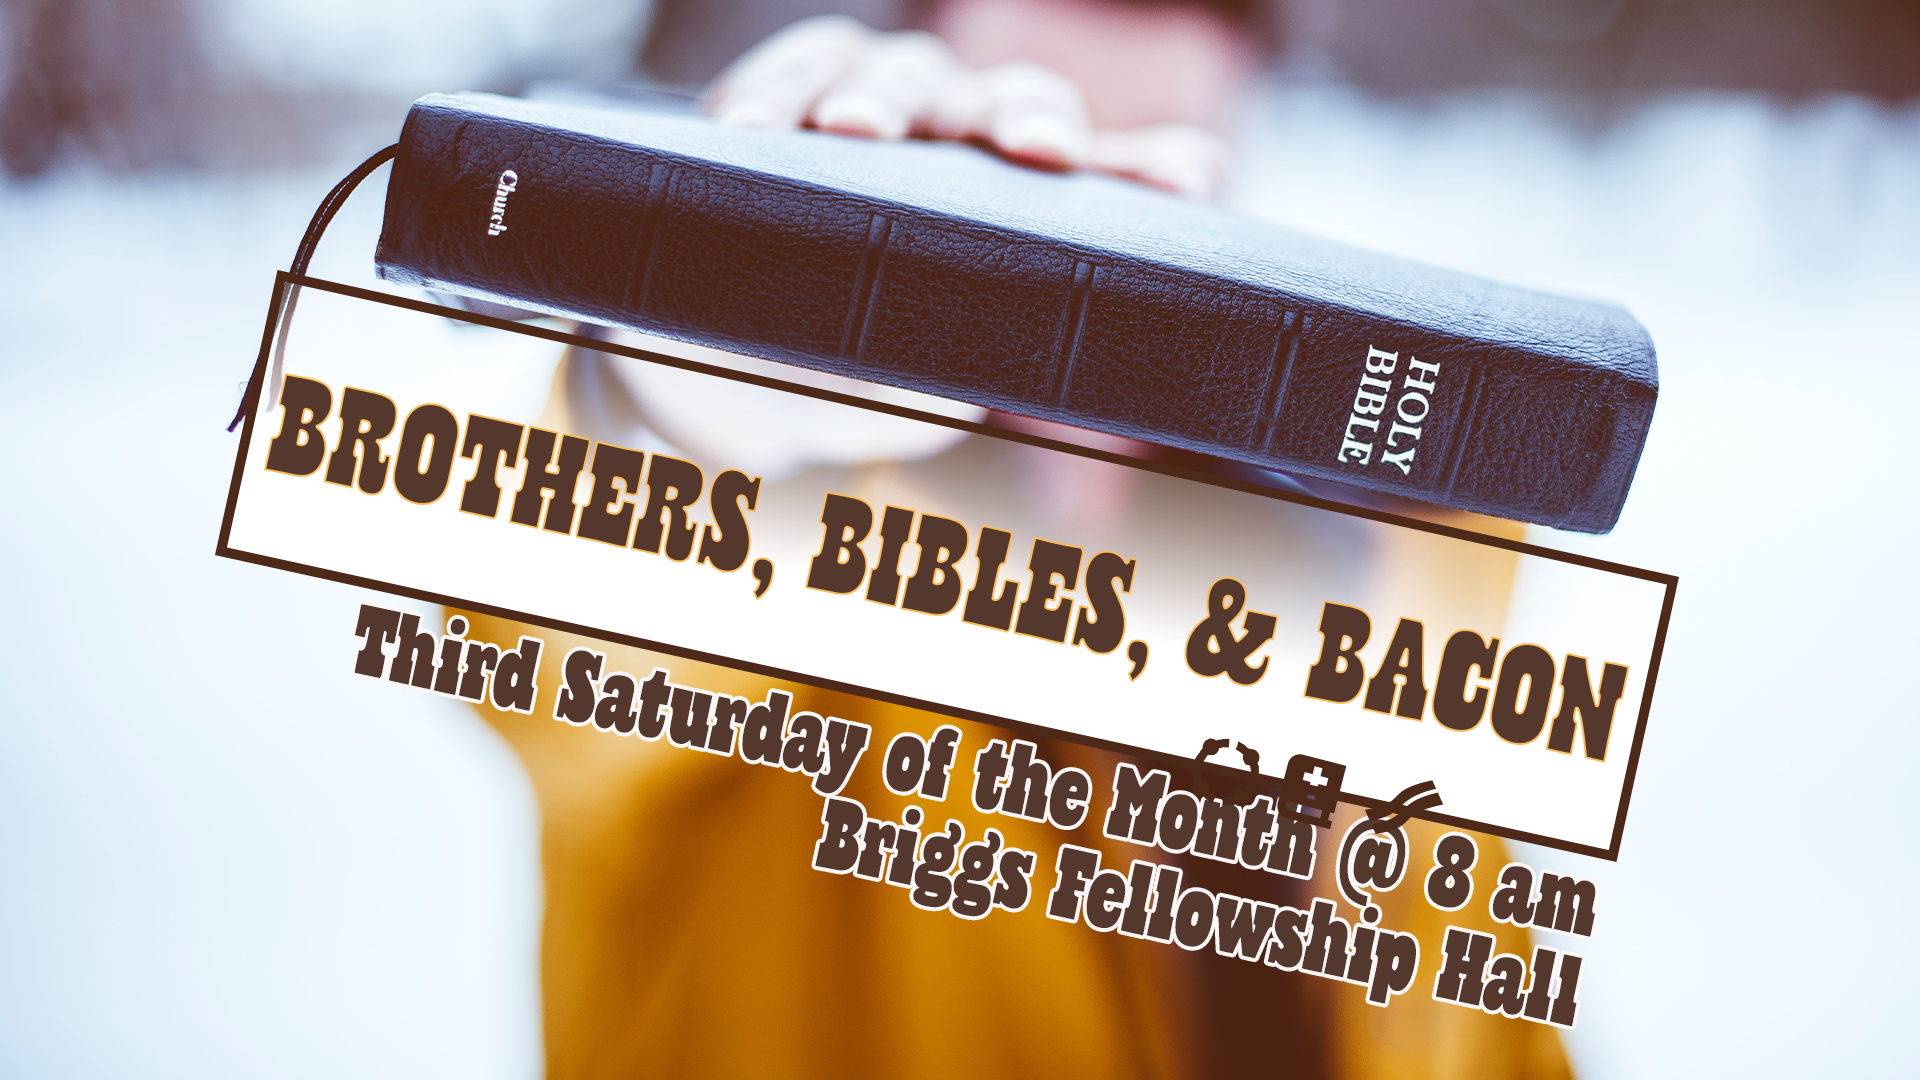 Brothers, Bibles, & Bacon